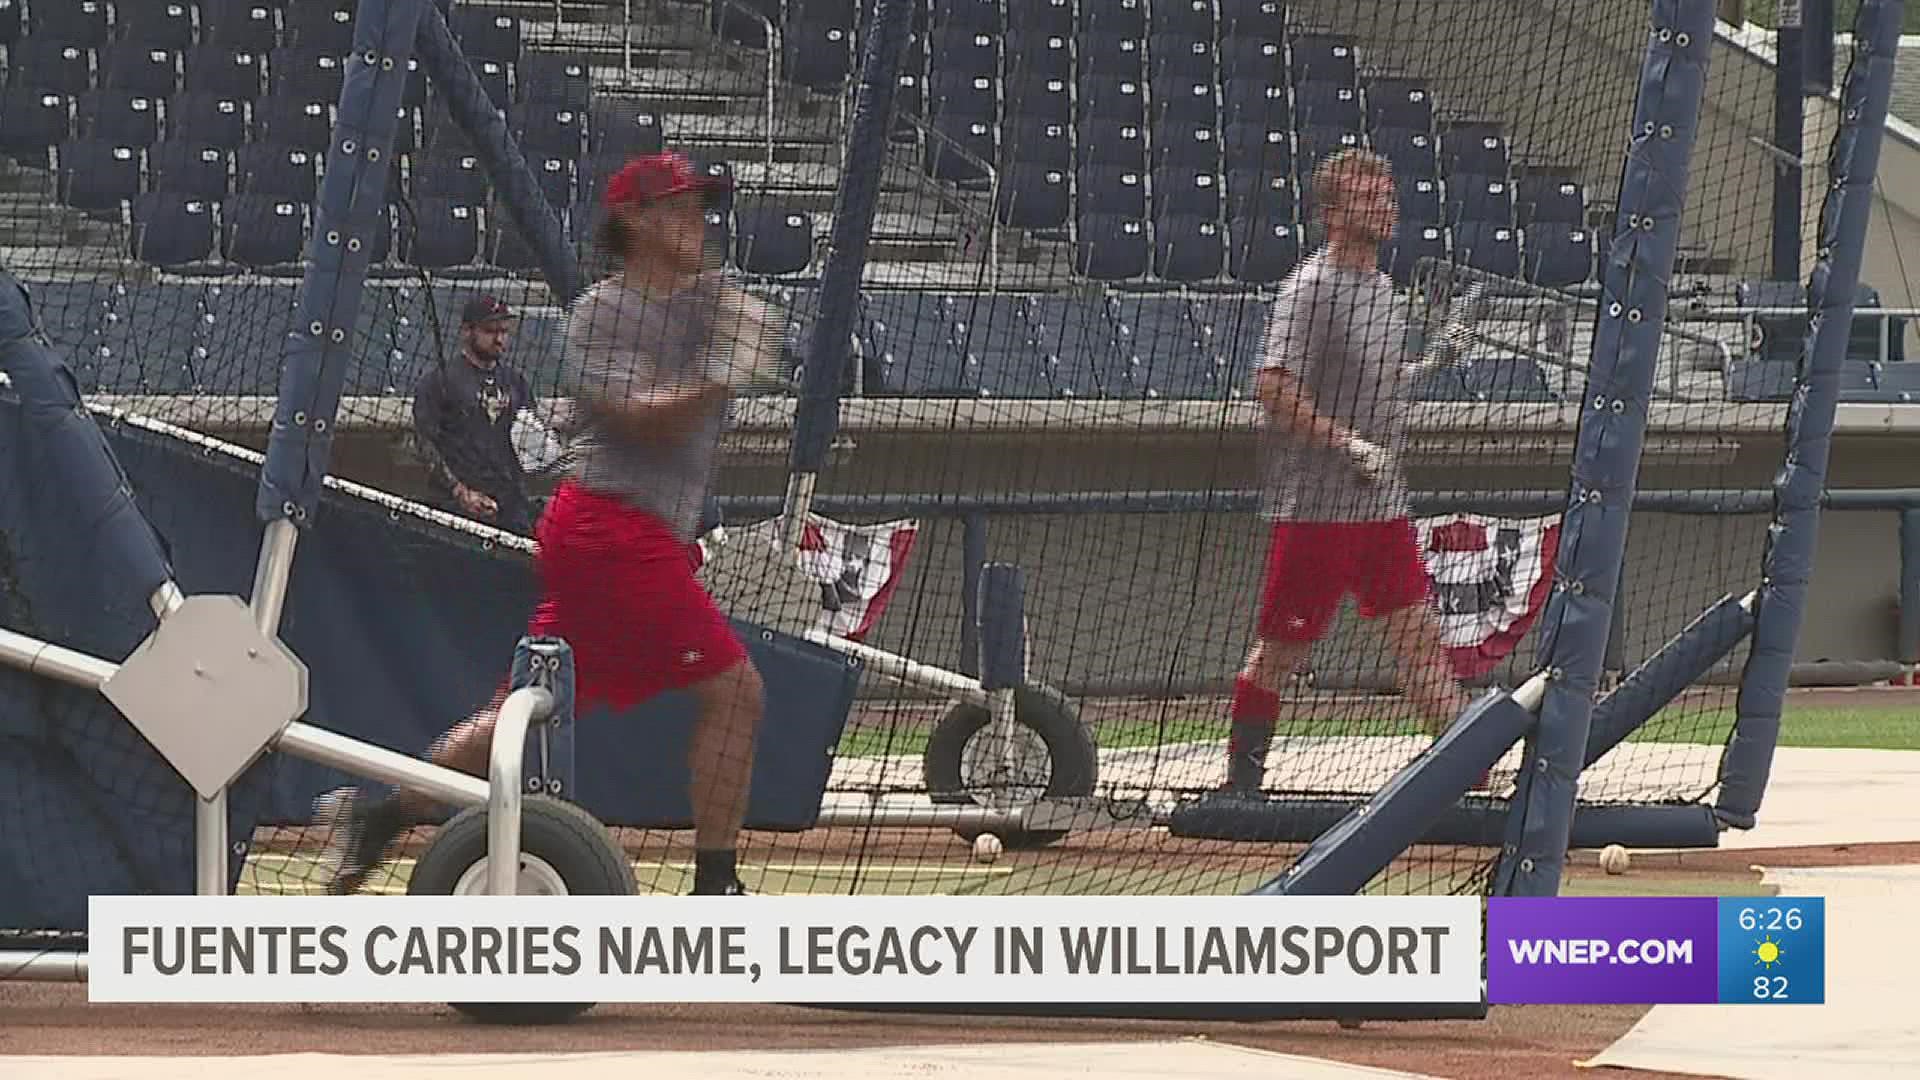 Tito Fuentes III Carries Name, Baseball Legacy for Crosscutters